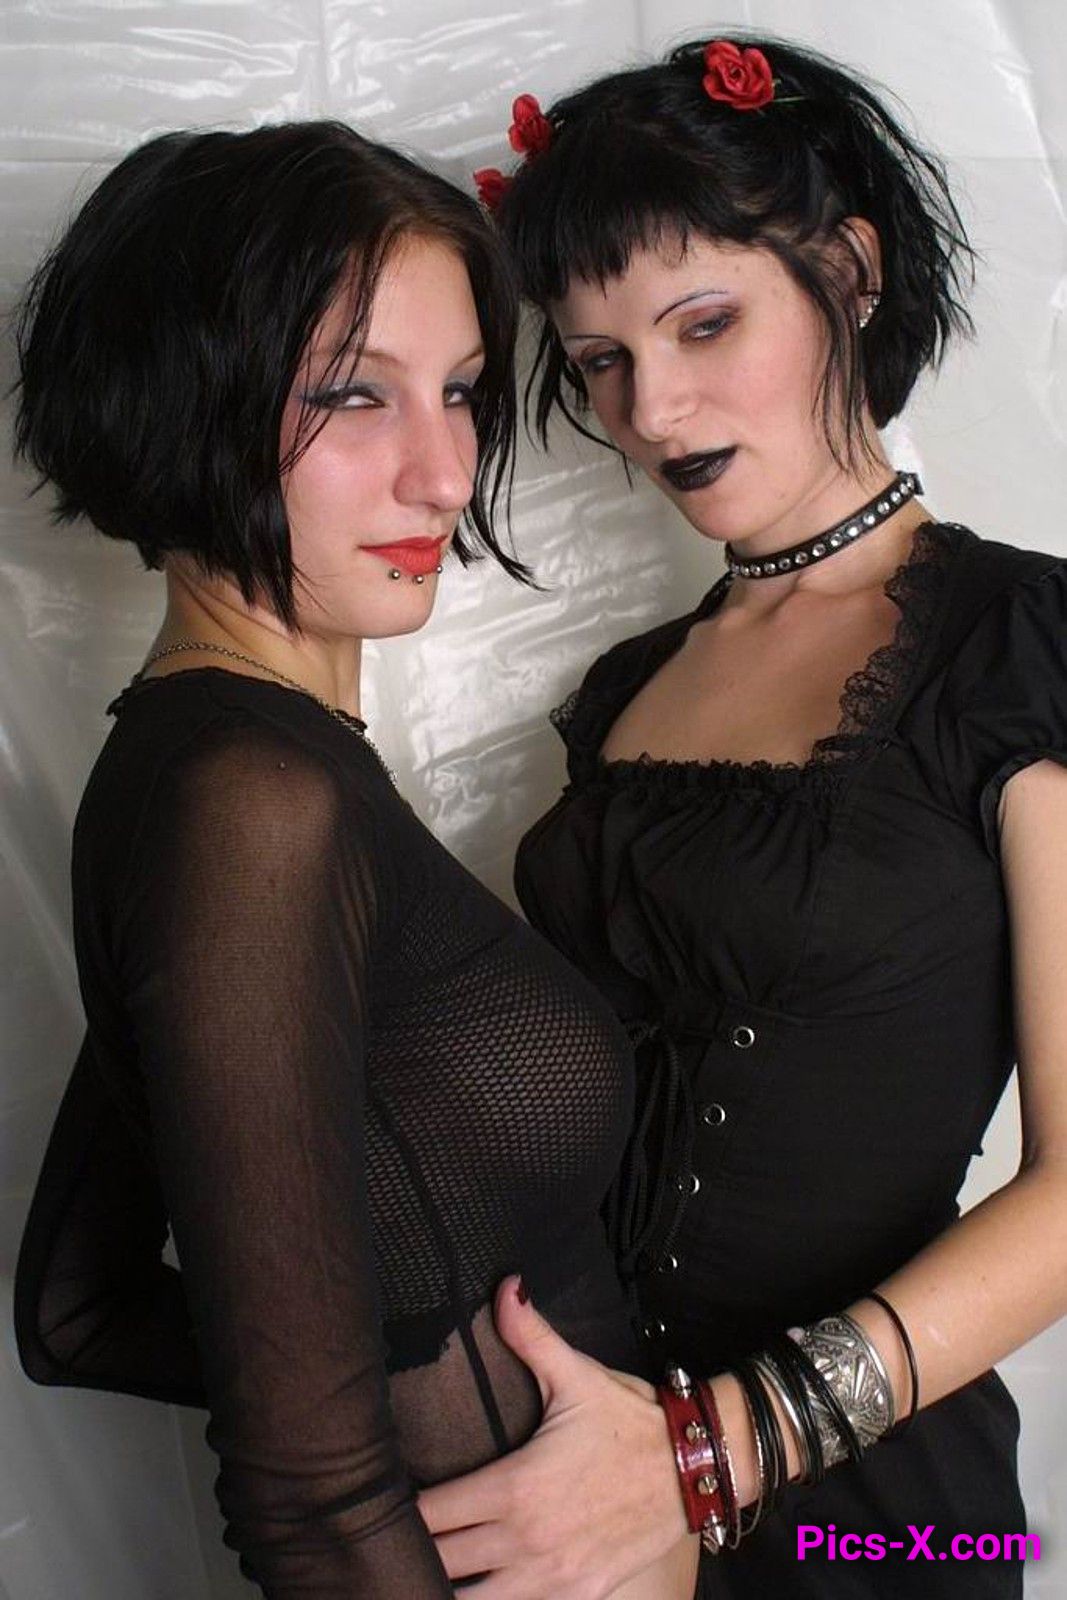 Gothic girlfriends getting it on with each other here - Punk Rock Girlfriend - Image 1